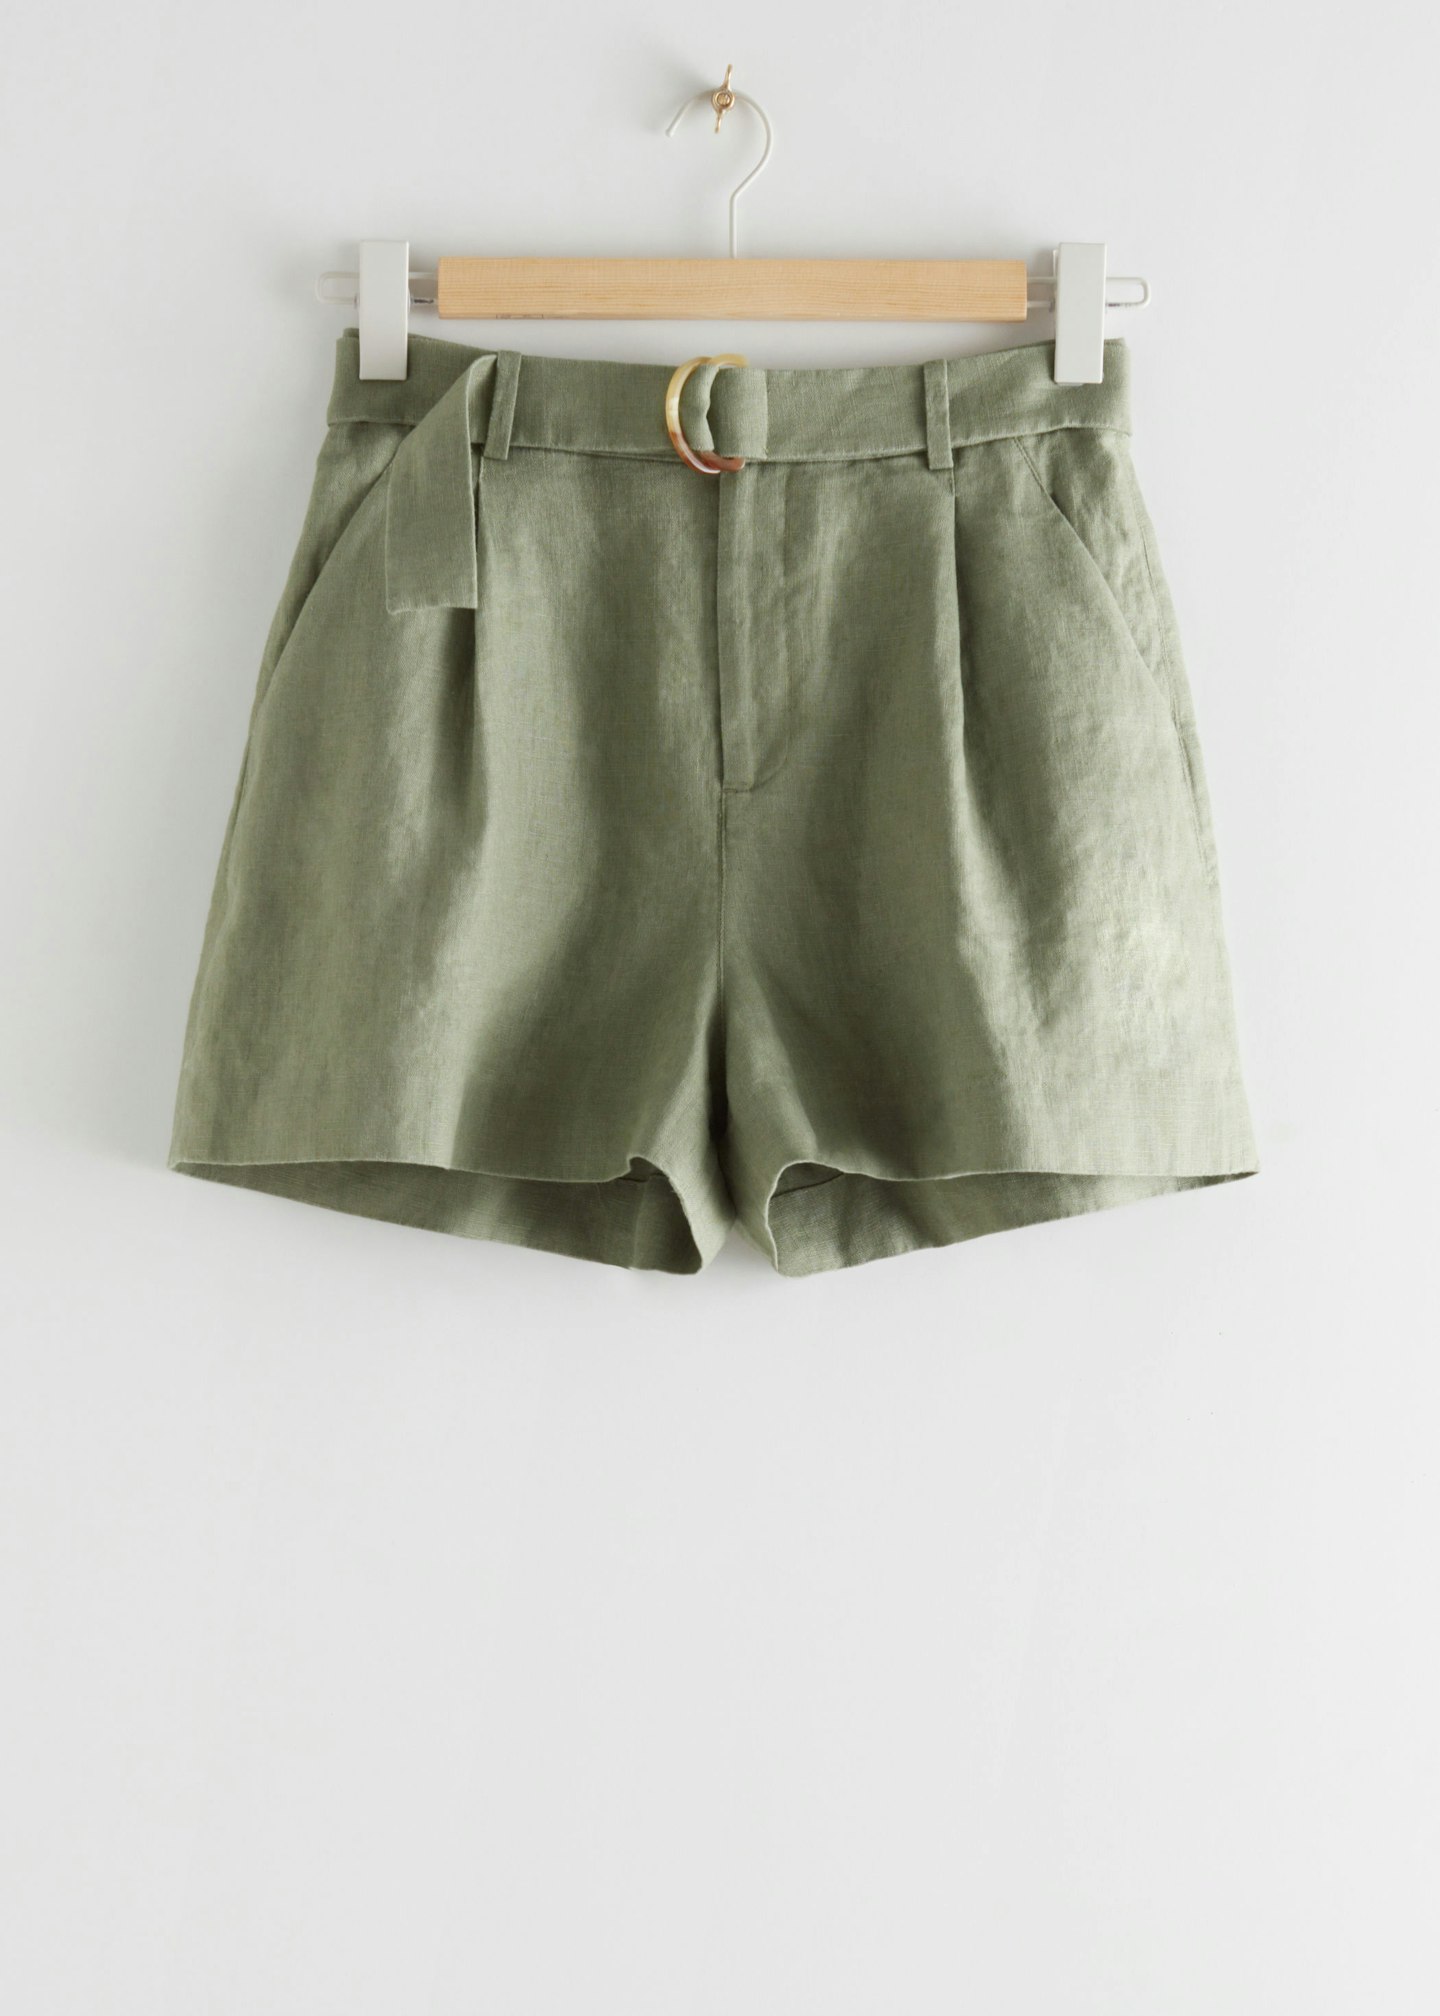 & Other Stories, Belted Linen Shorts, WERE £55 NOW £44